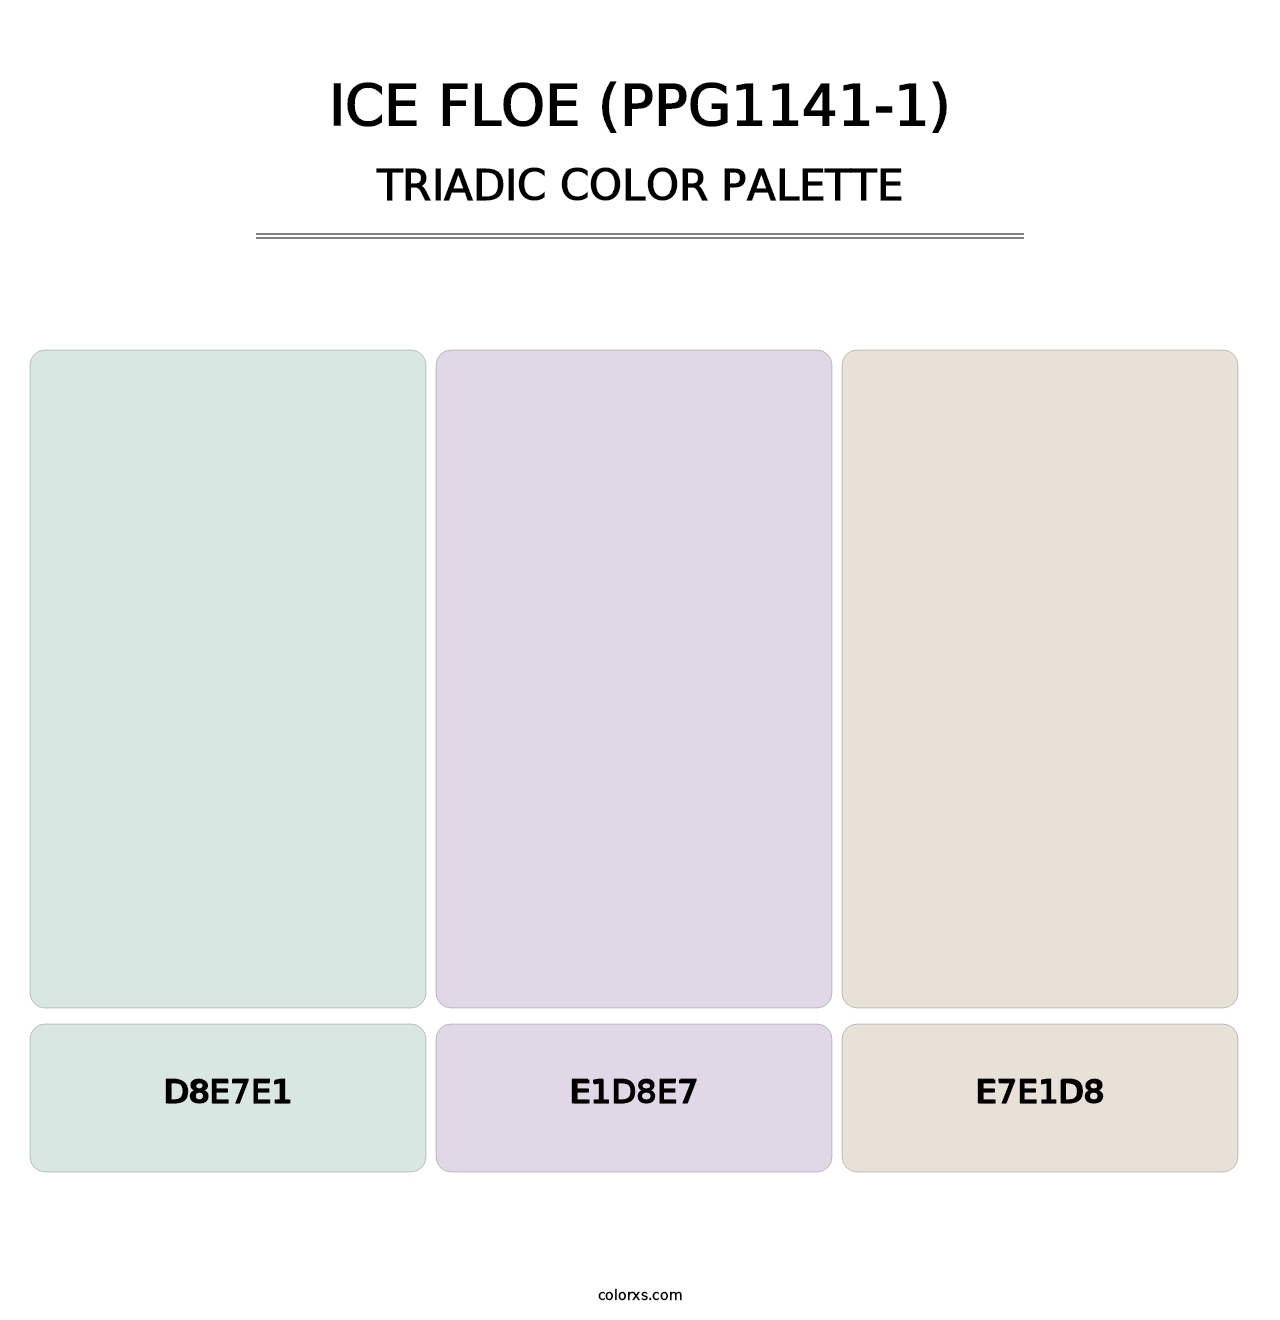 Ice Floe (PPG1141-1) - Triadic Color Palette